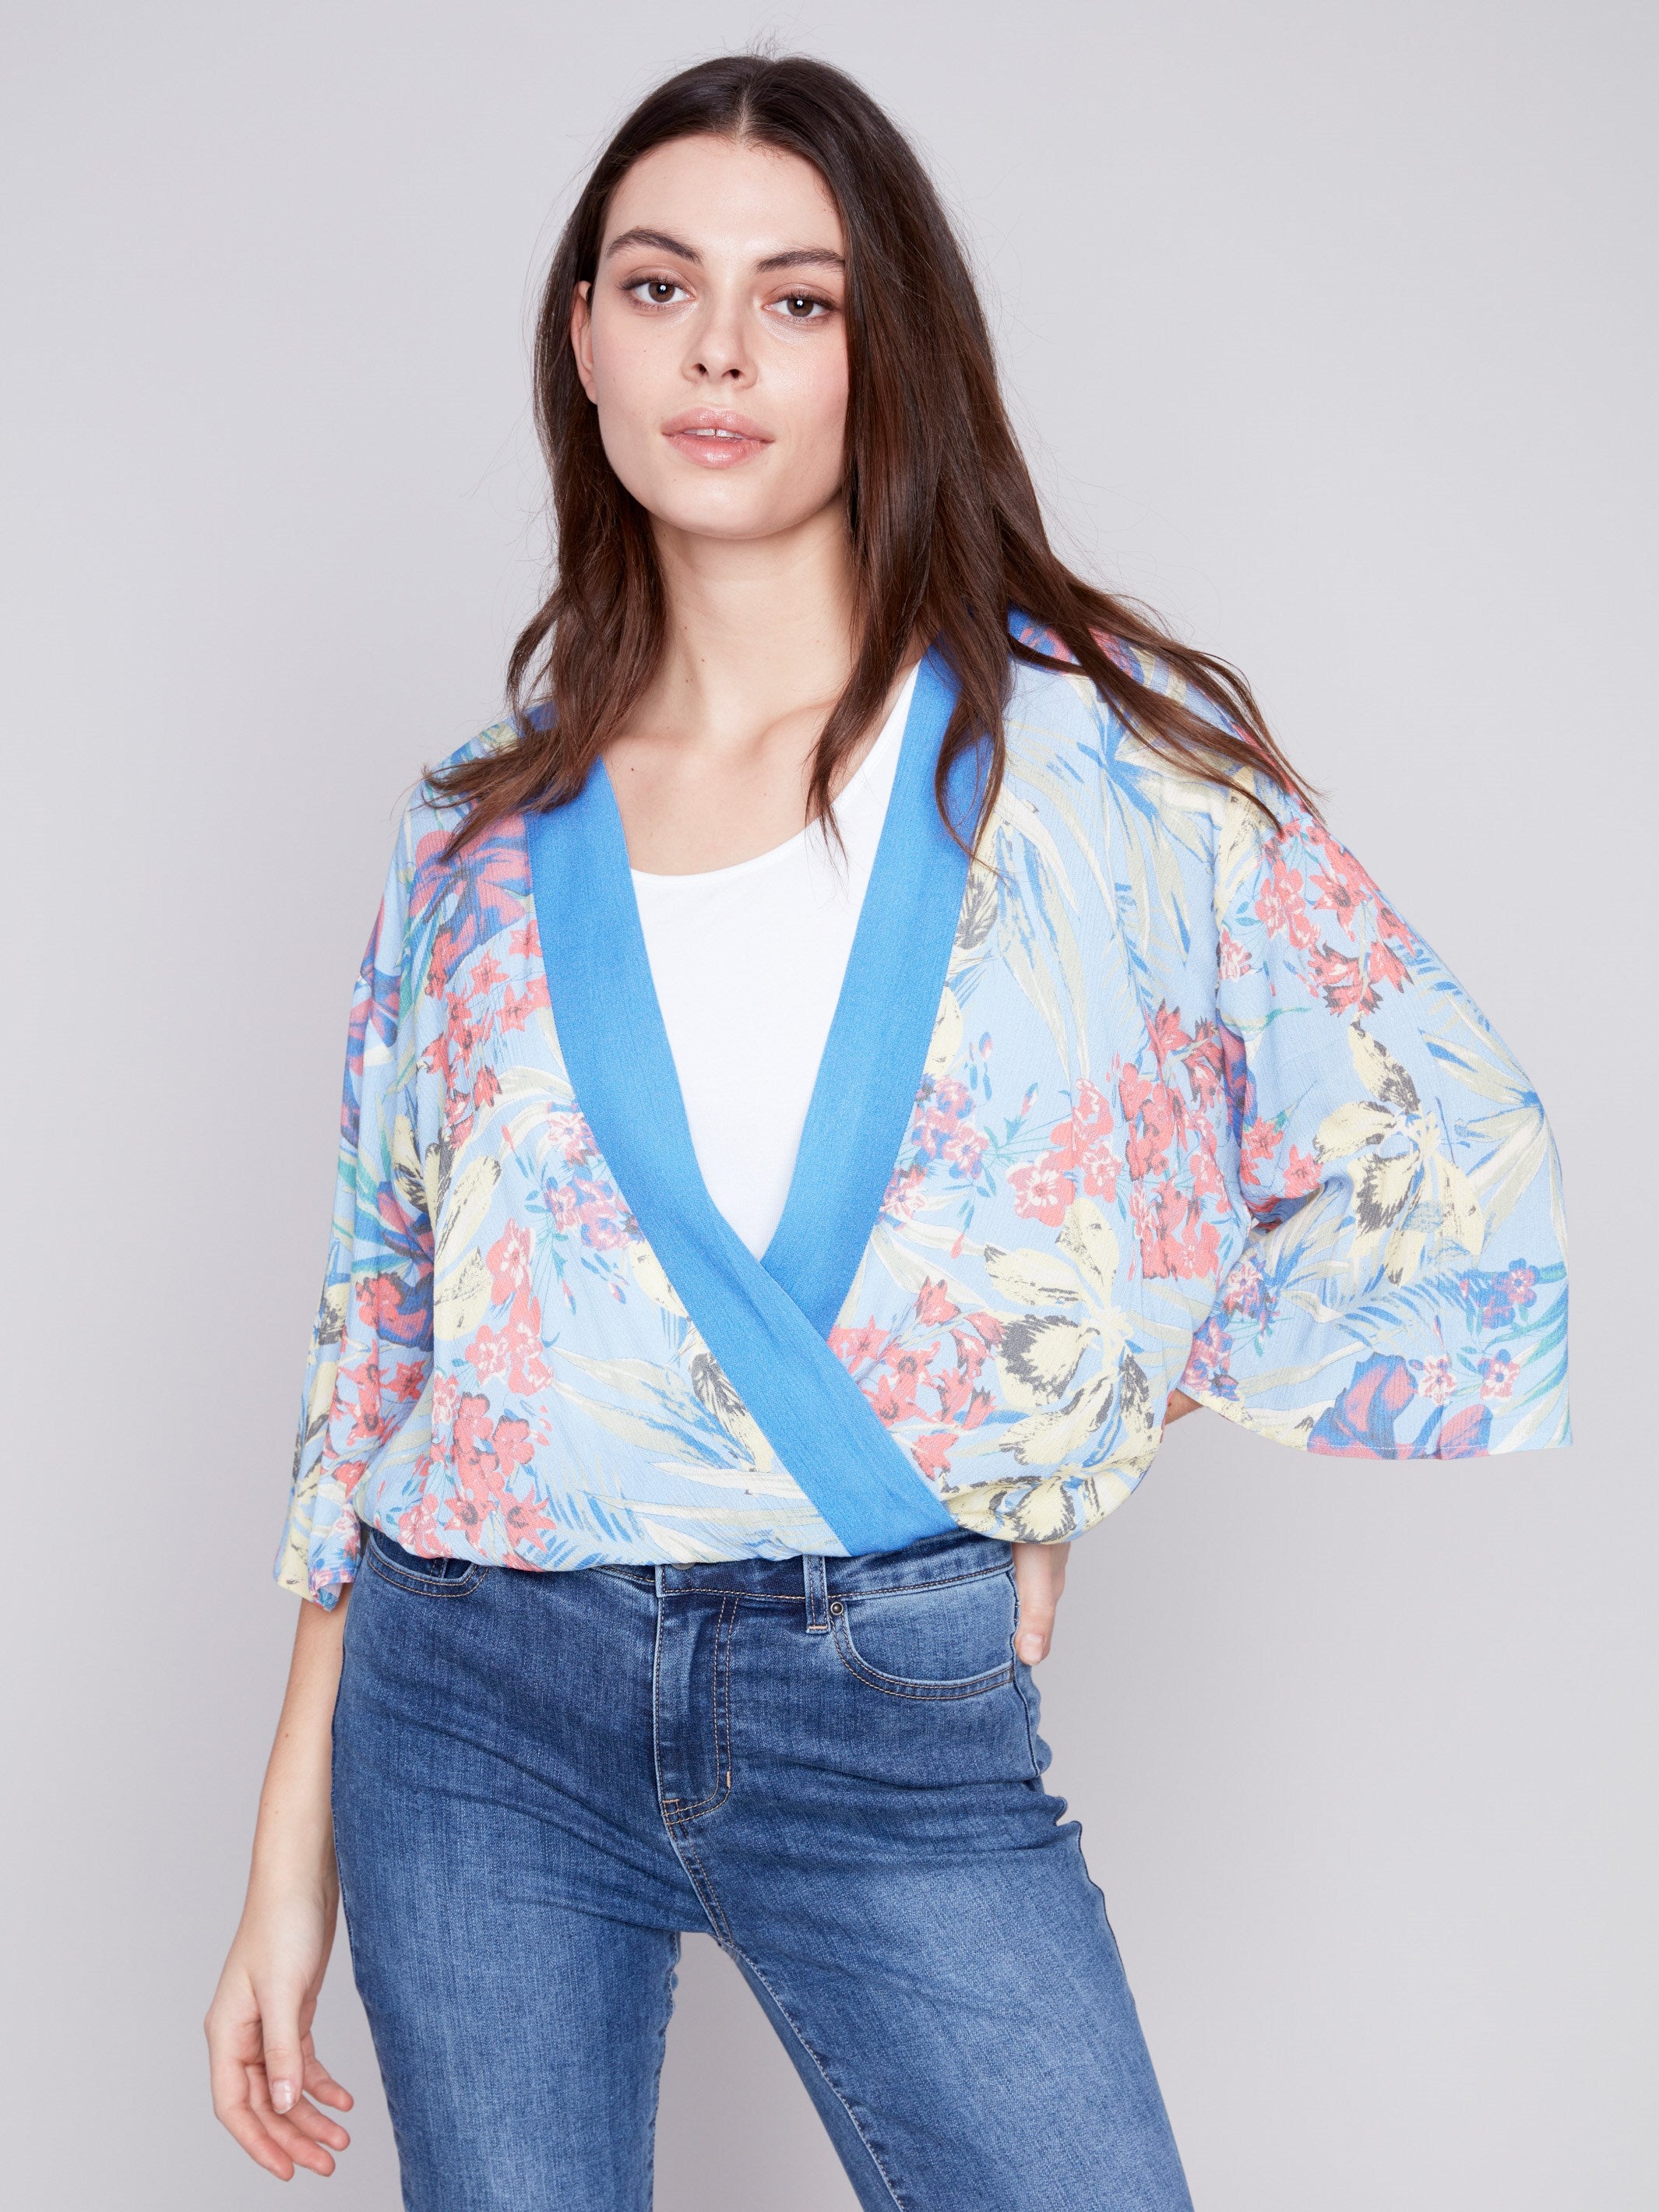 Charlie B Printed Overlap Blouse - Lillypad - Image 3